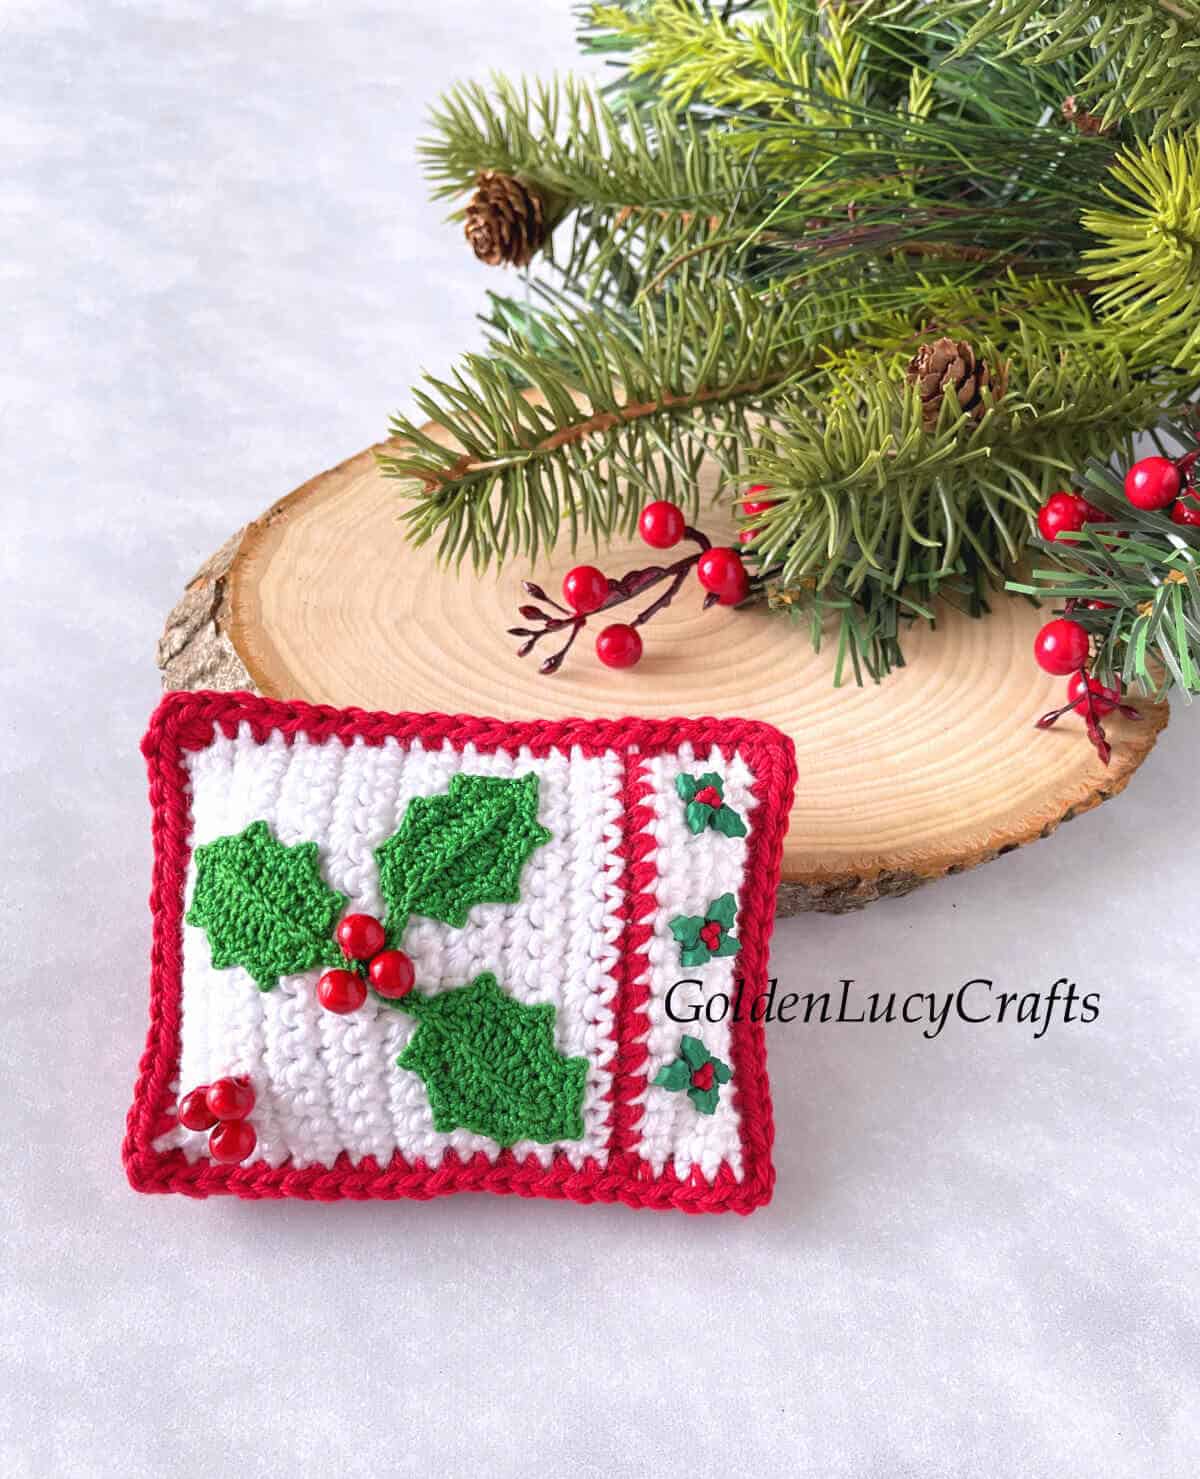 Crocheted Christmas mini pillow next to tree trunk slice and Christmas tree branch.